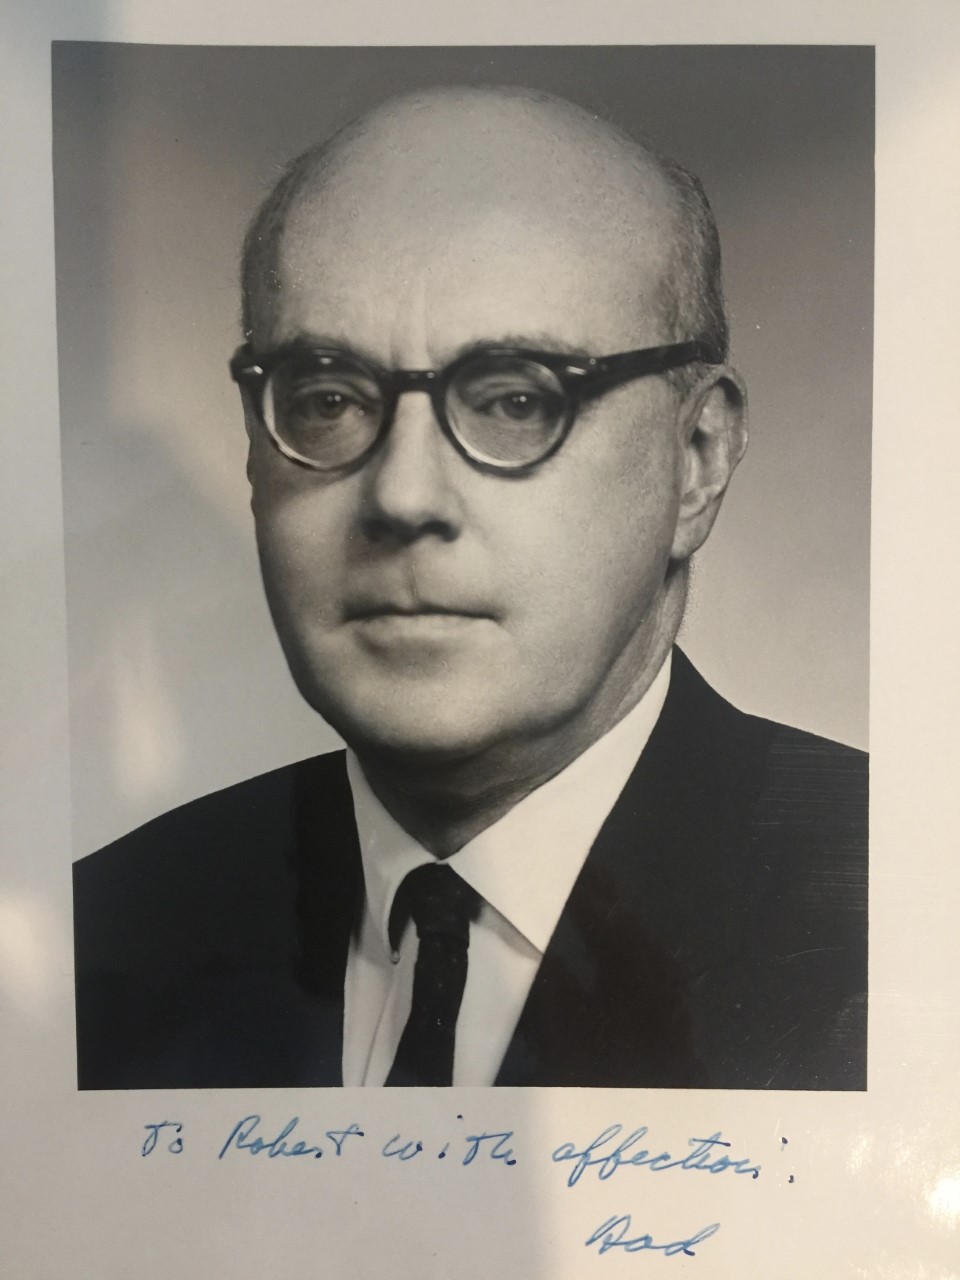 Black and White Photograph of Robert McCormick, wearing glasses